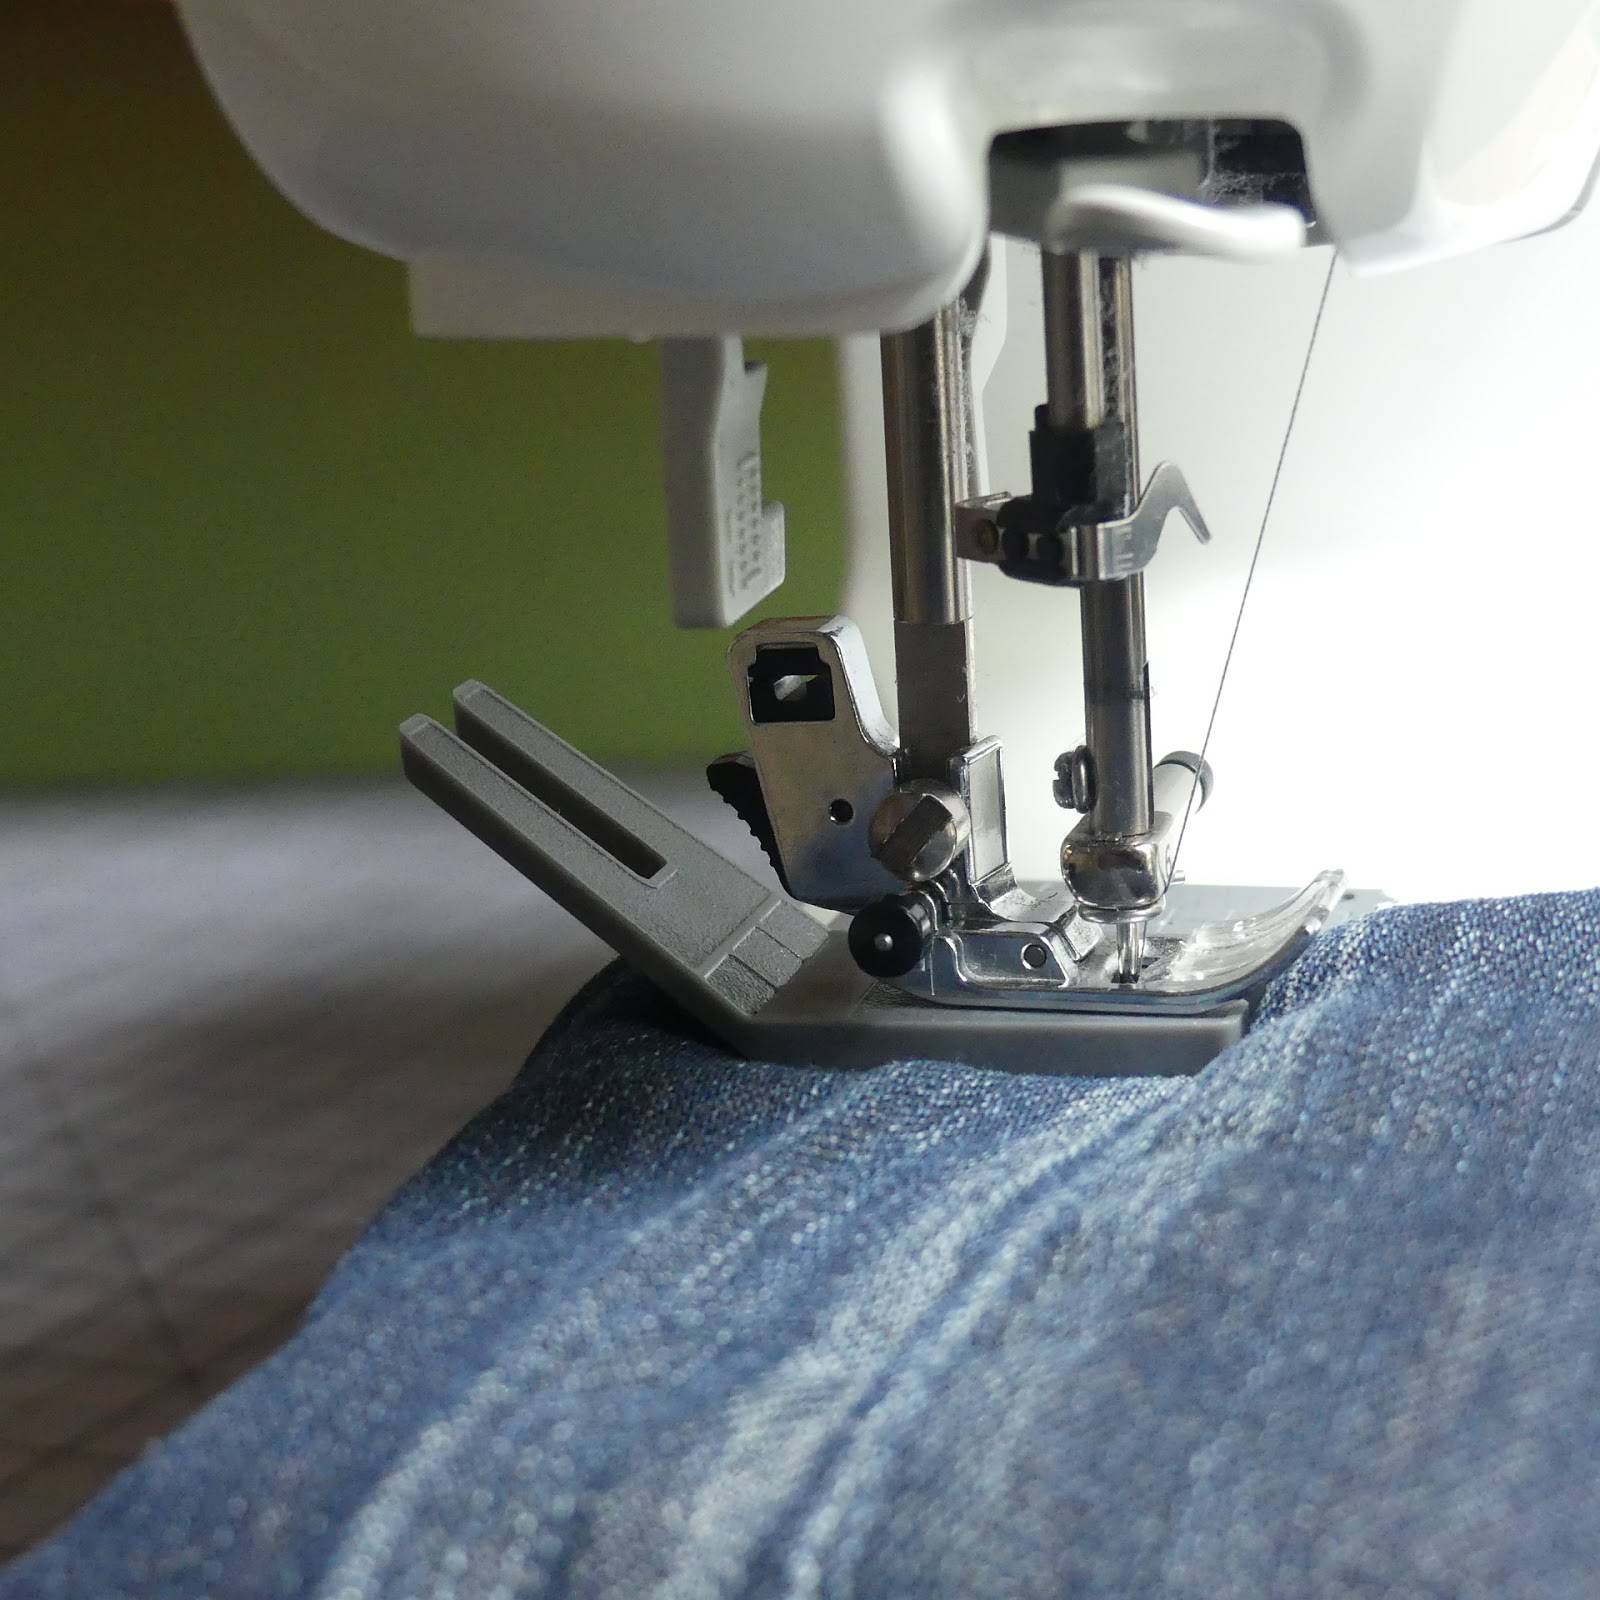 Sewing Machine Feet: Solutions for Sewing Bulky Fabric